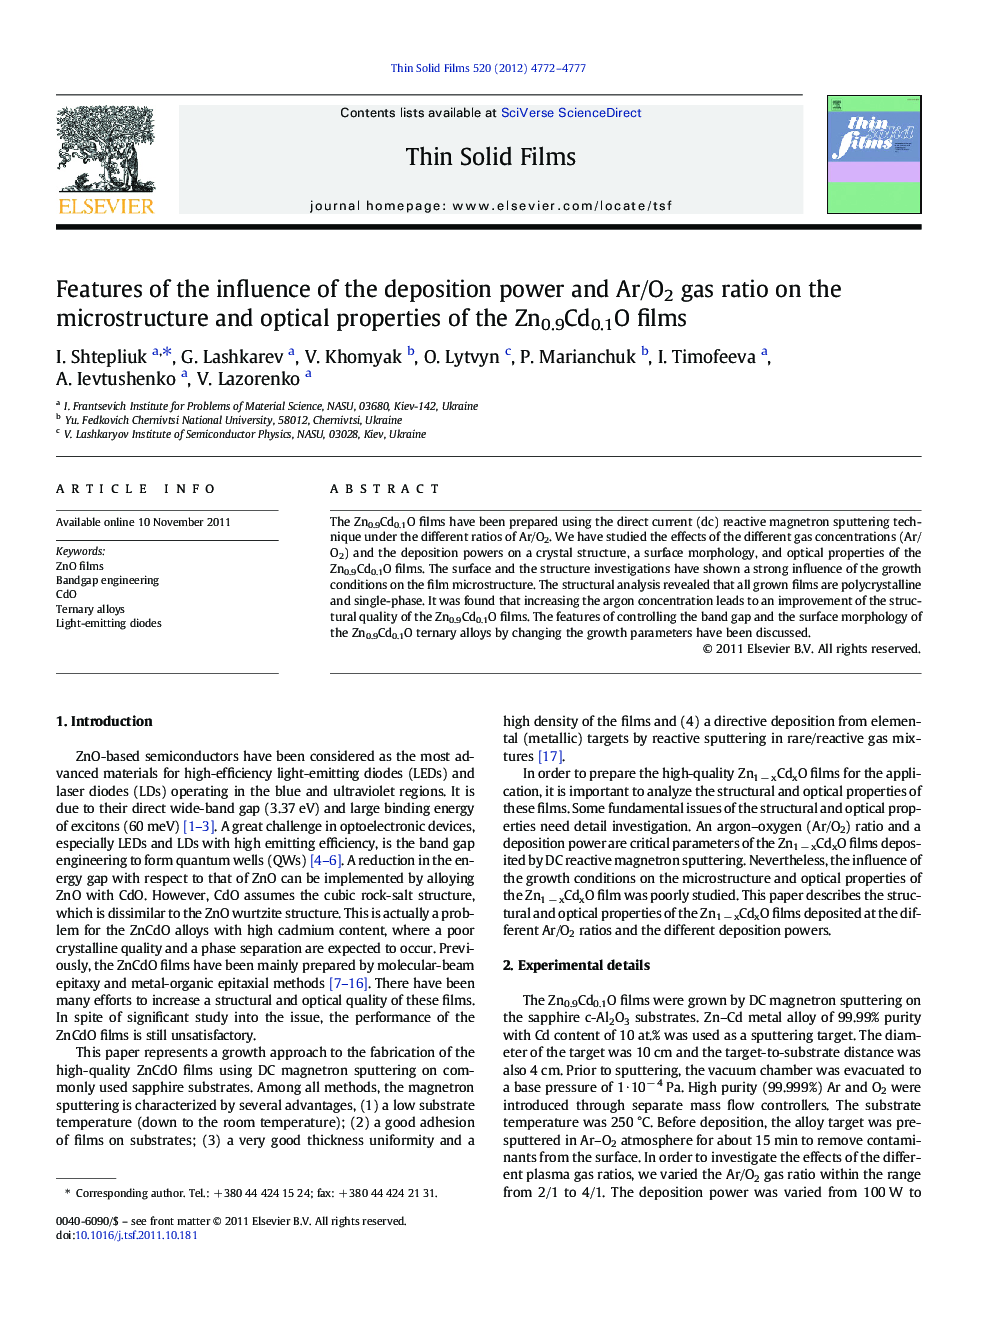 Features of the influence of the deposition power and Ar/O2 gas ratio on the microstructure and optical properties of the Zn0.9Cd0.1O films